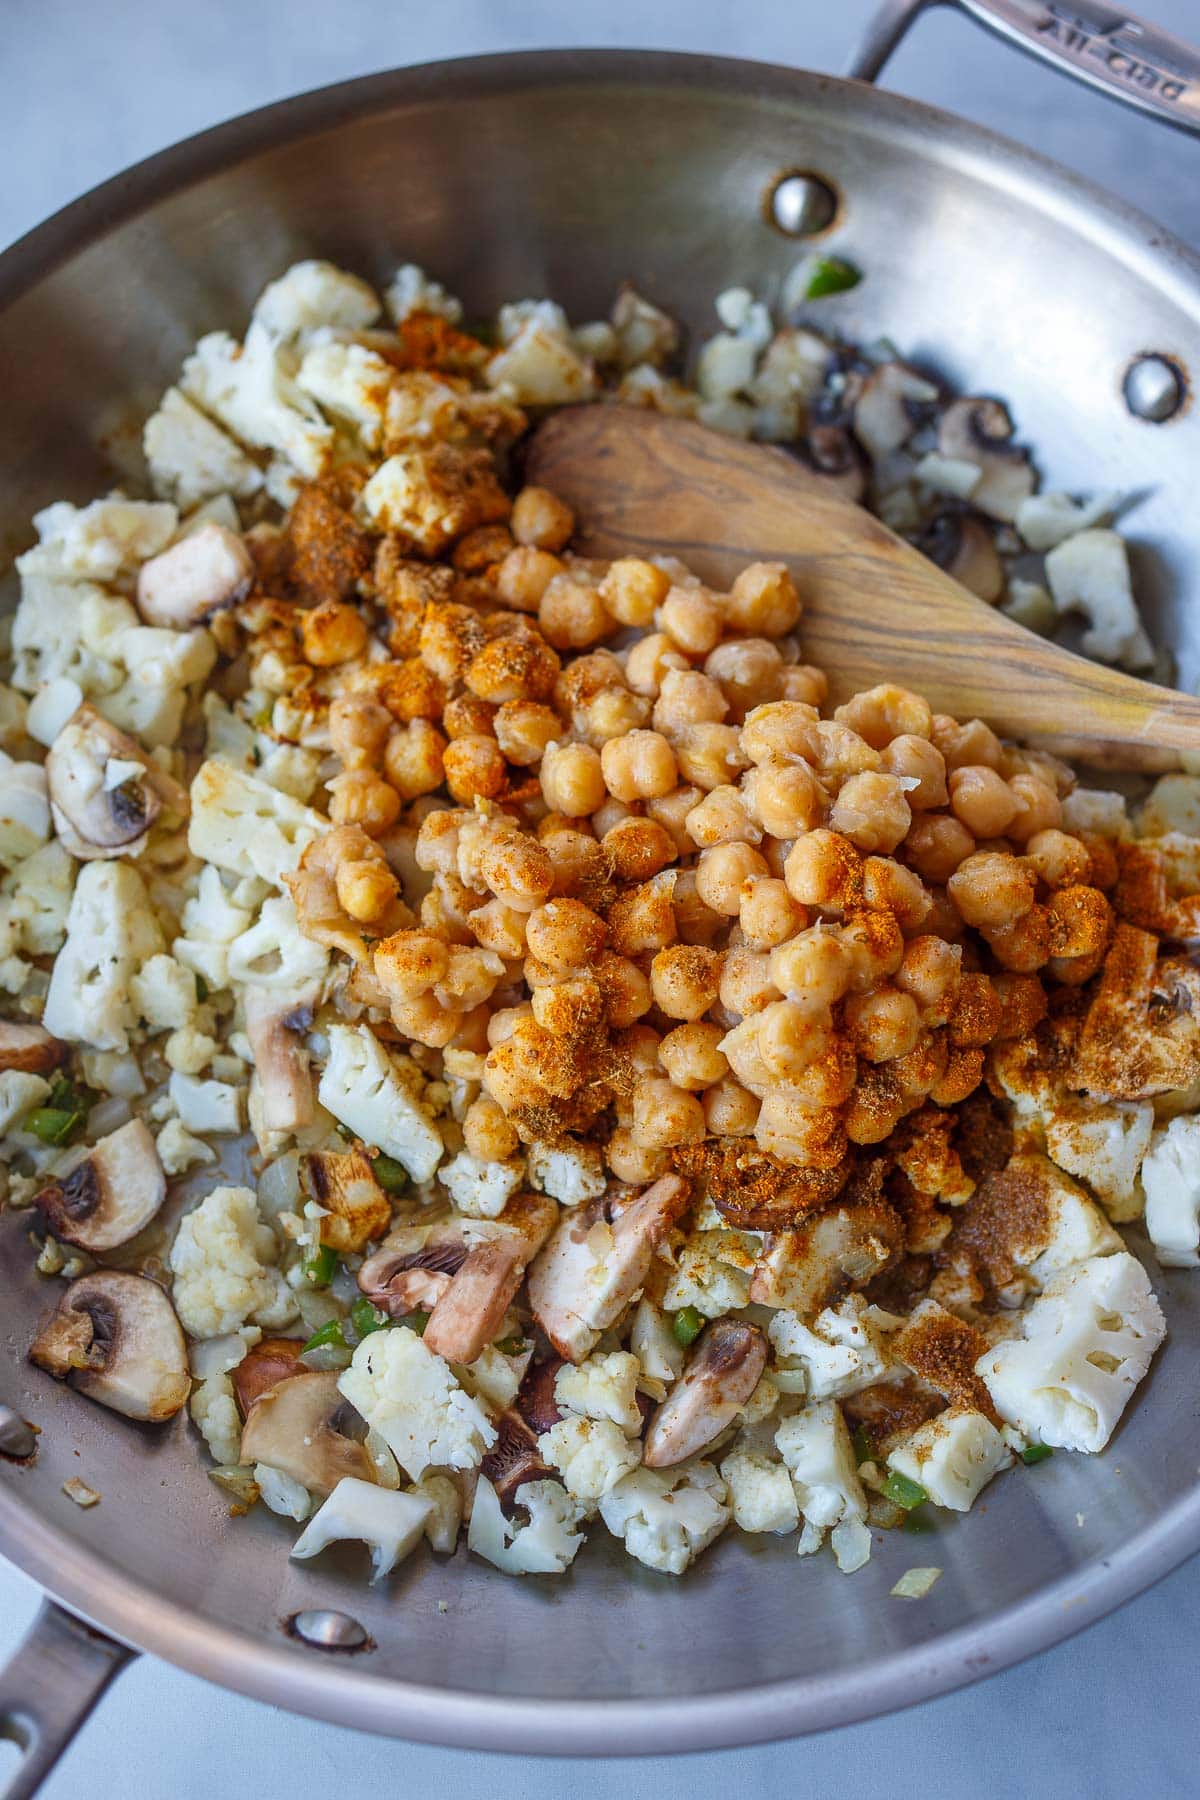 chickpeas and spices added to frying pan with mushrooms, cauliflower, onions.